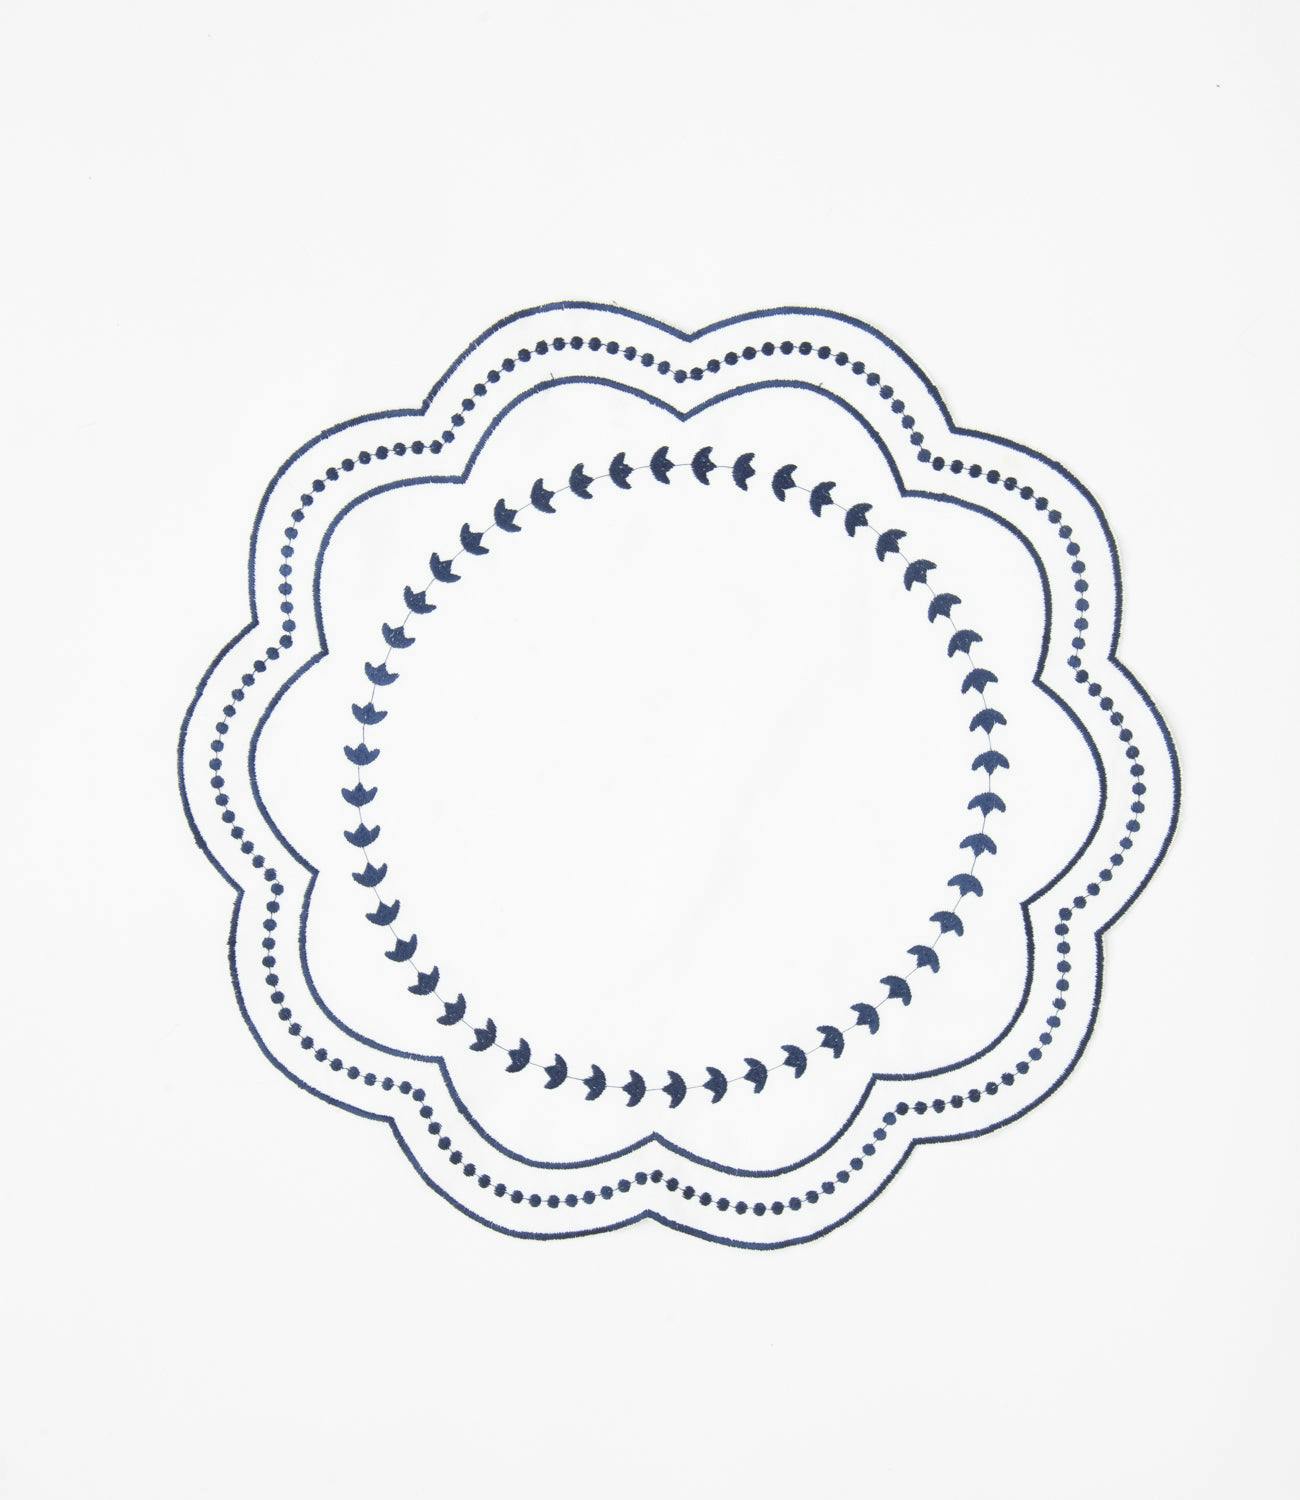 Polka and Petals Scallop Edge Placemats - Set of 6, a product by Table Manners